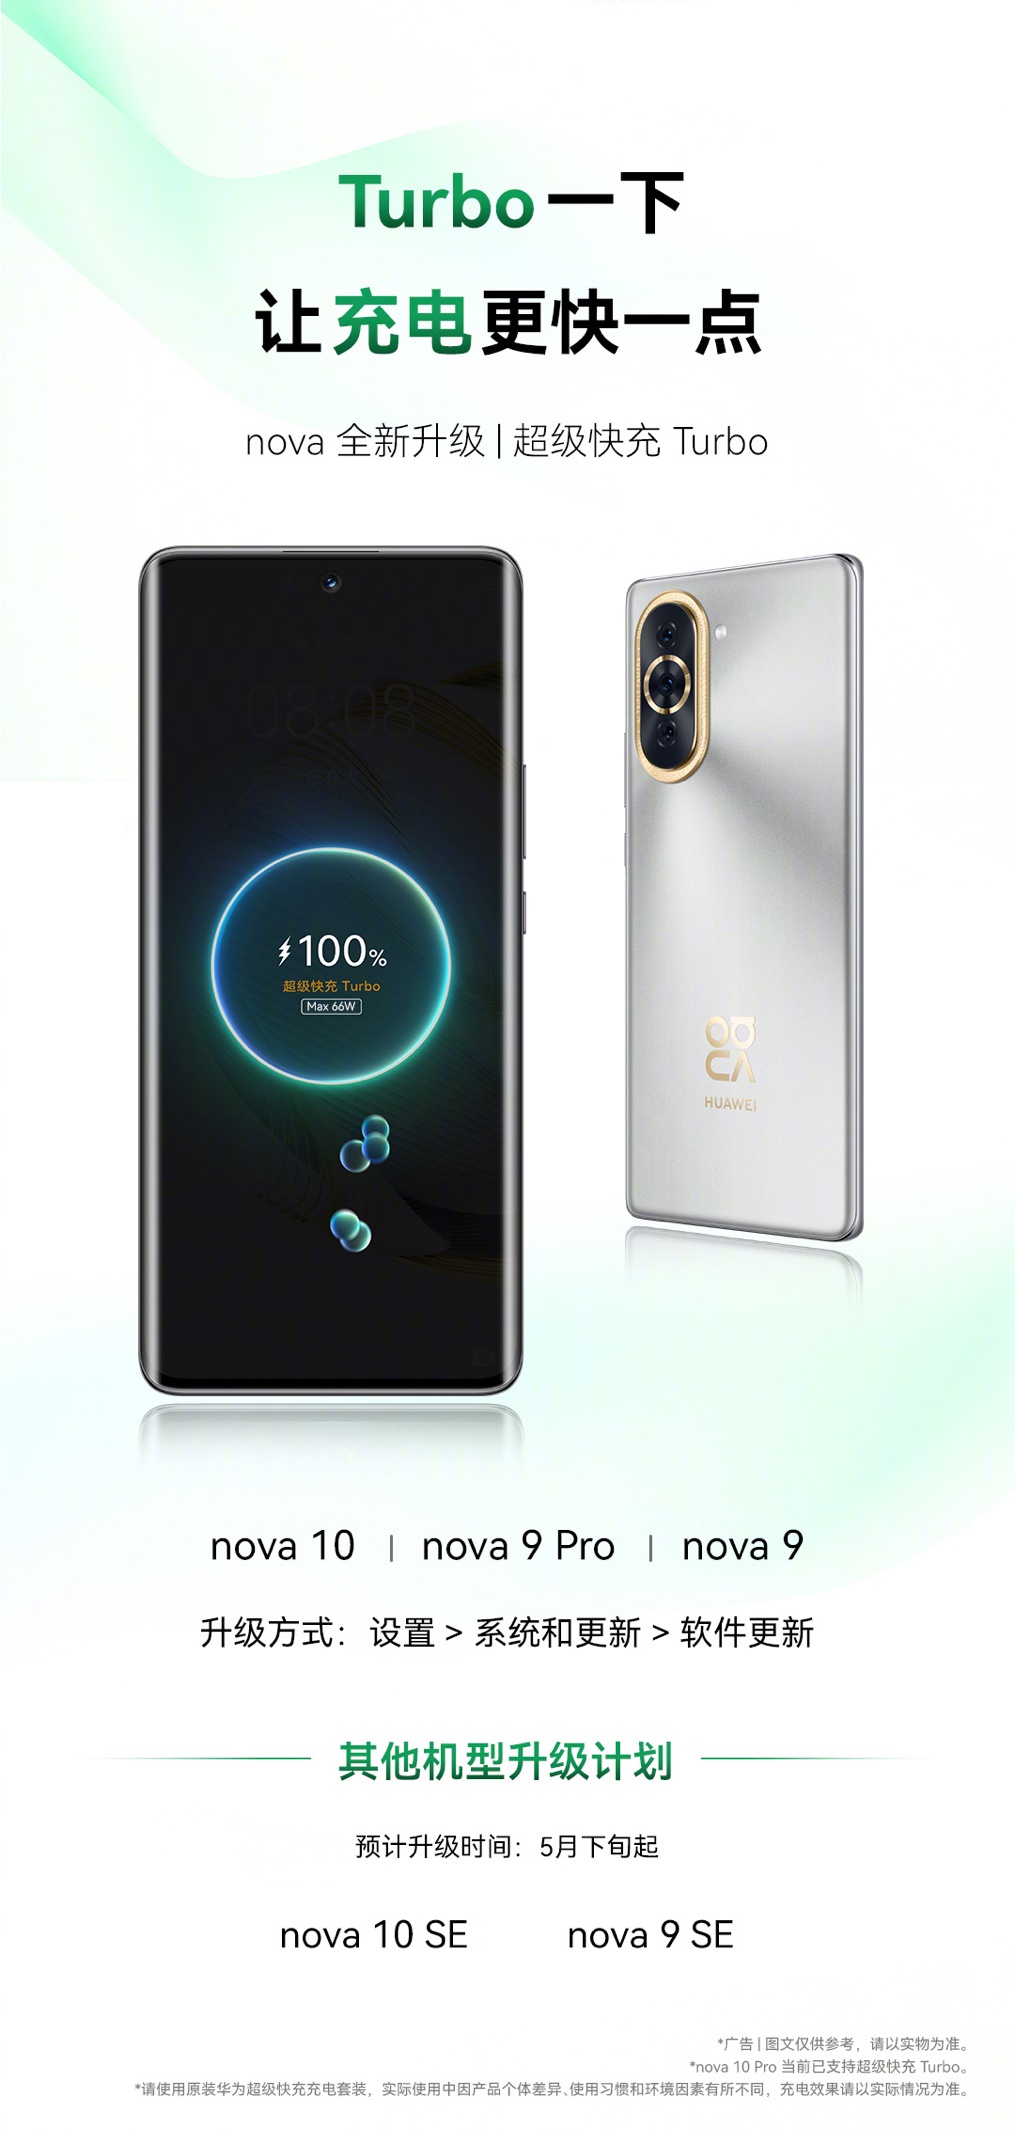 Huawei Nova 10, 9 and 9 Pro to get fast charging Turbo mode